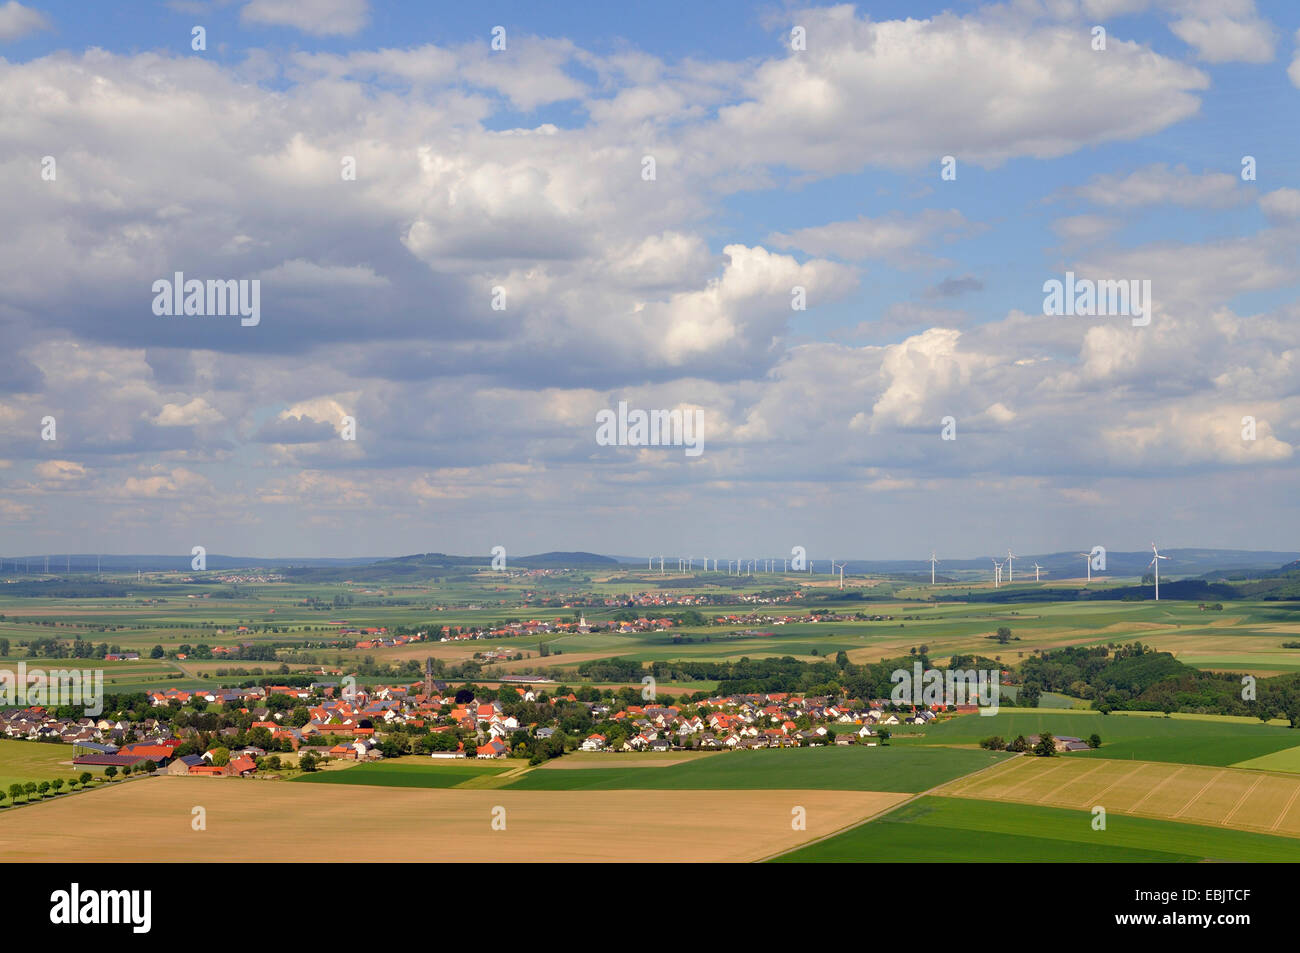 panoramic view over an agricultural landscape wind energy plant, Germany Stock Photo